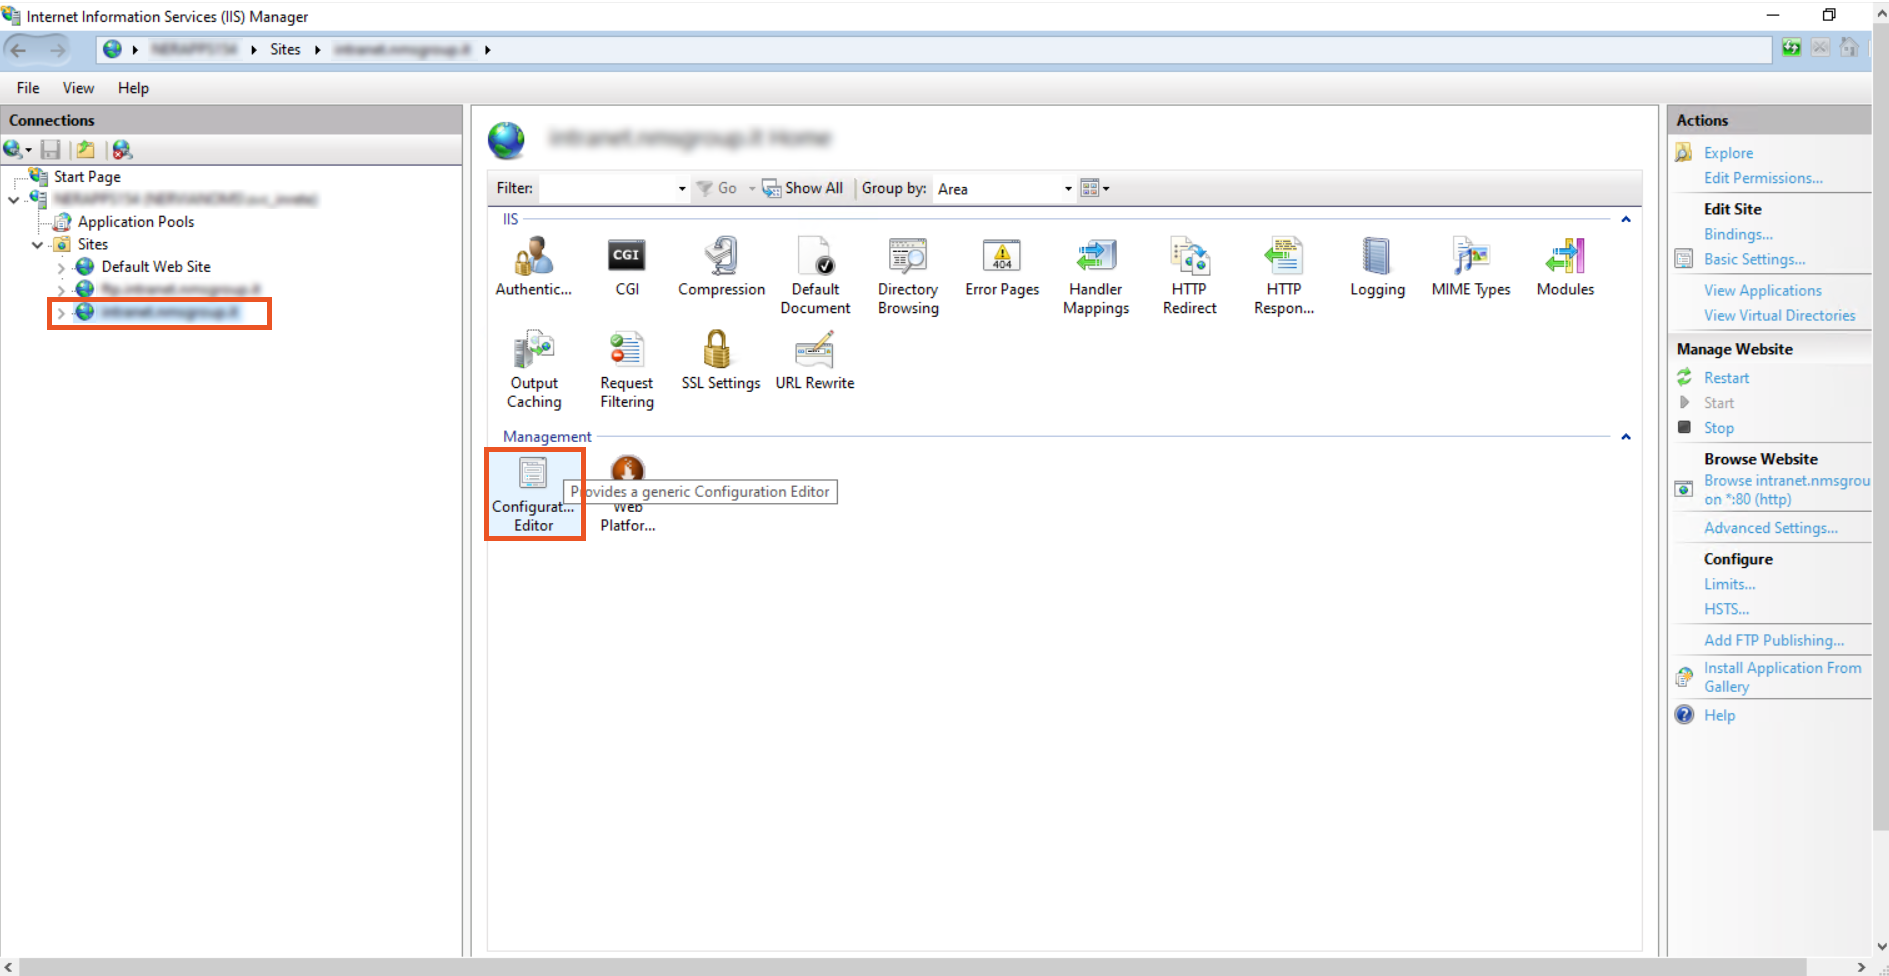 internet information service IIS manager configuration editor